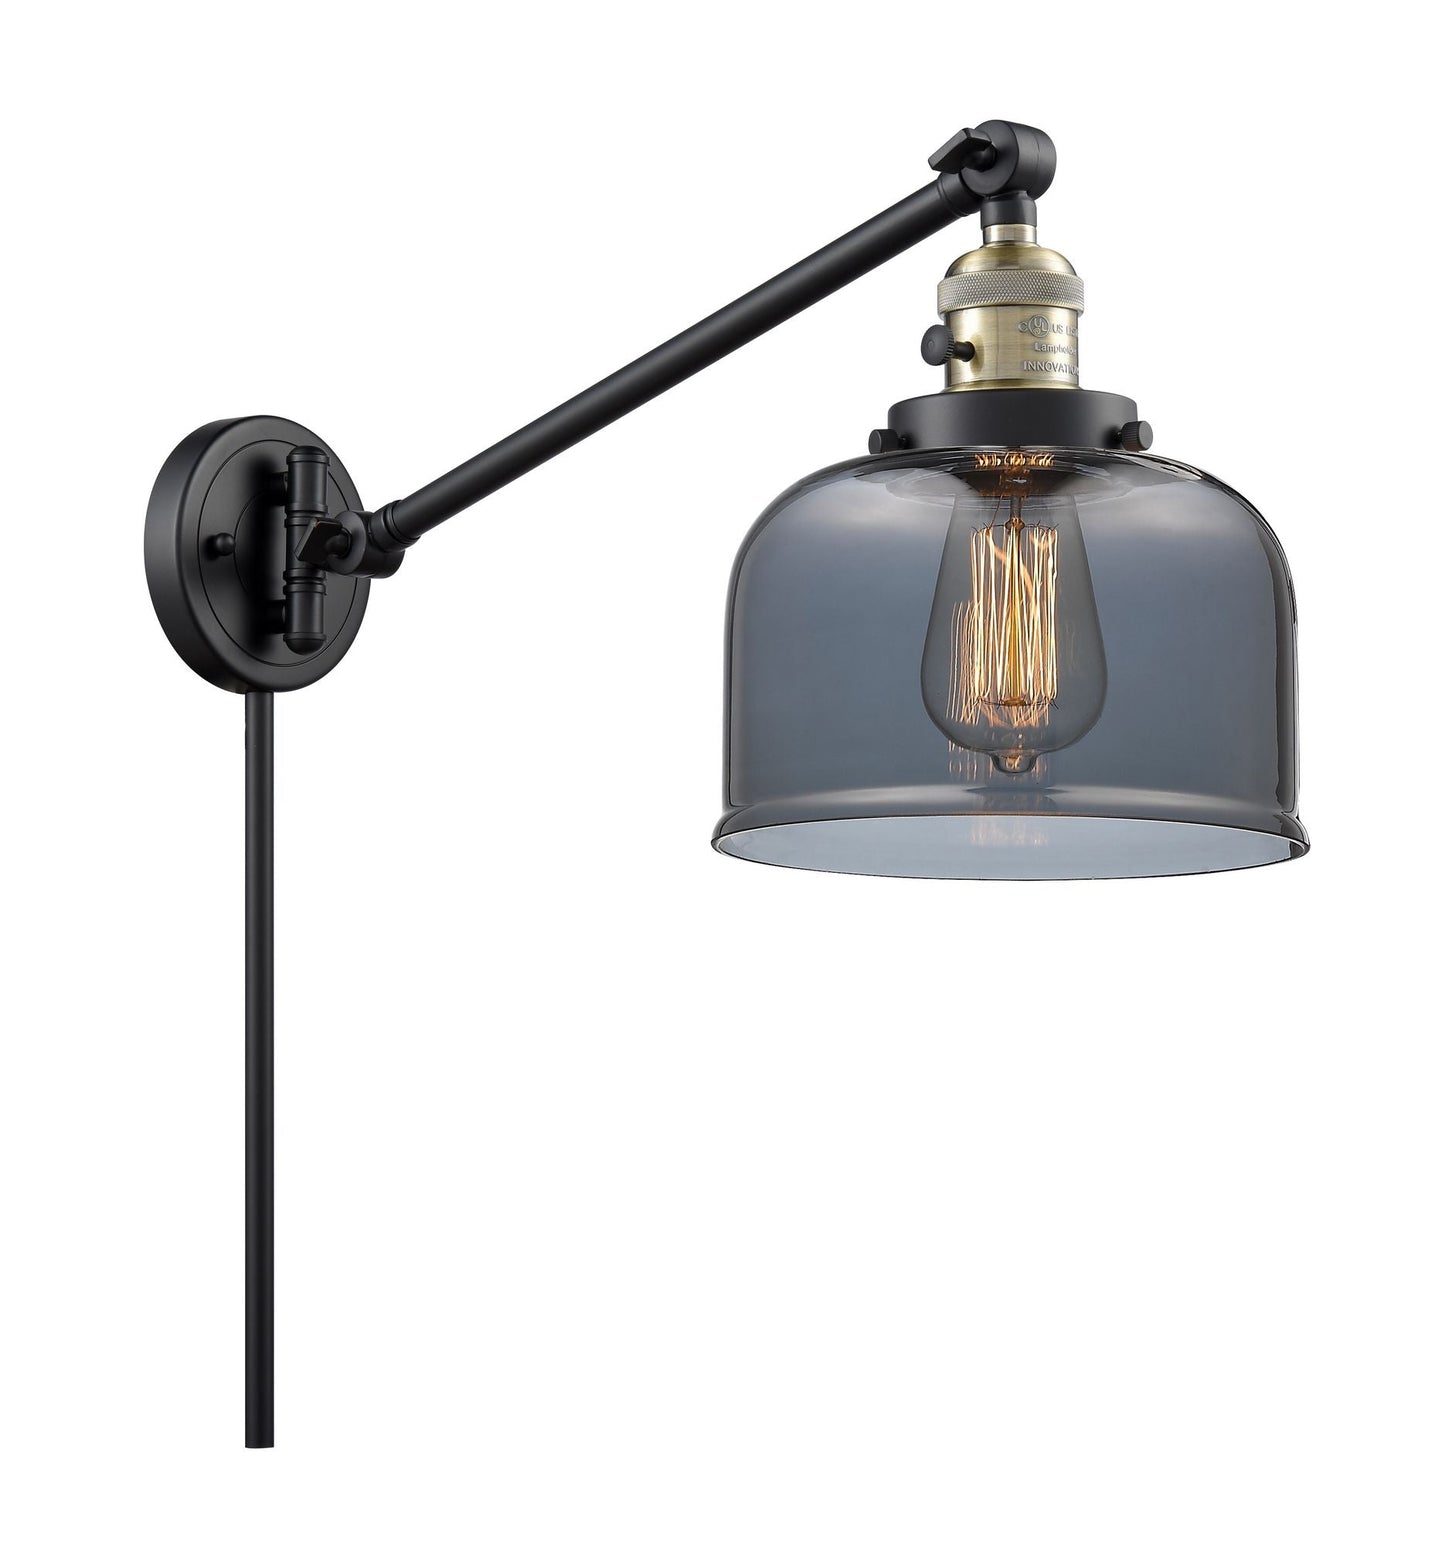 237-BAB-G73 1-Light 8" Black Antique Brass Swing Arm - Plated Smoke Large Bell Glass - LED Bulb - Dimmensions: 8 x 21 x 25 - Glass Up or Down: Yes